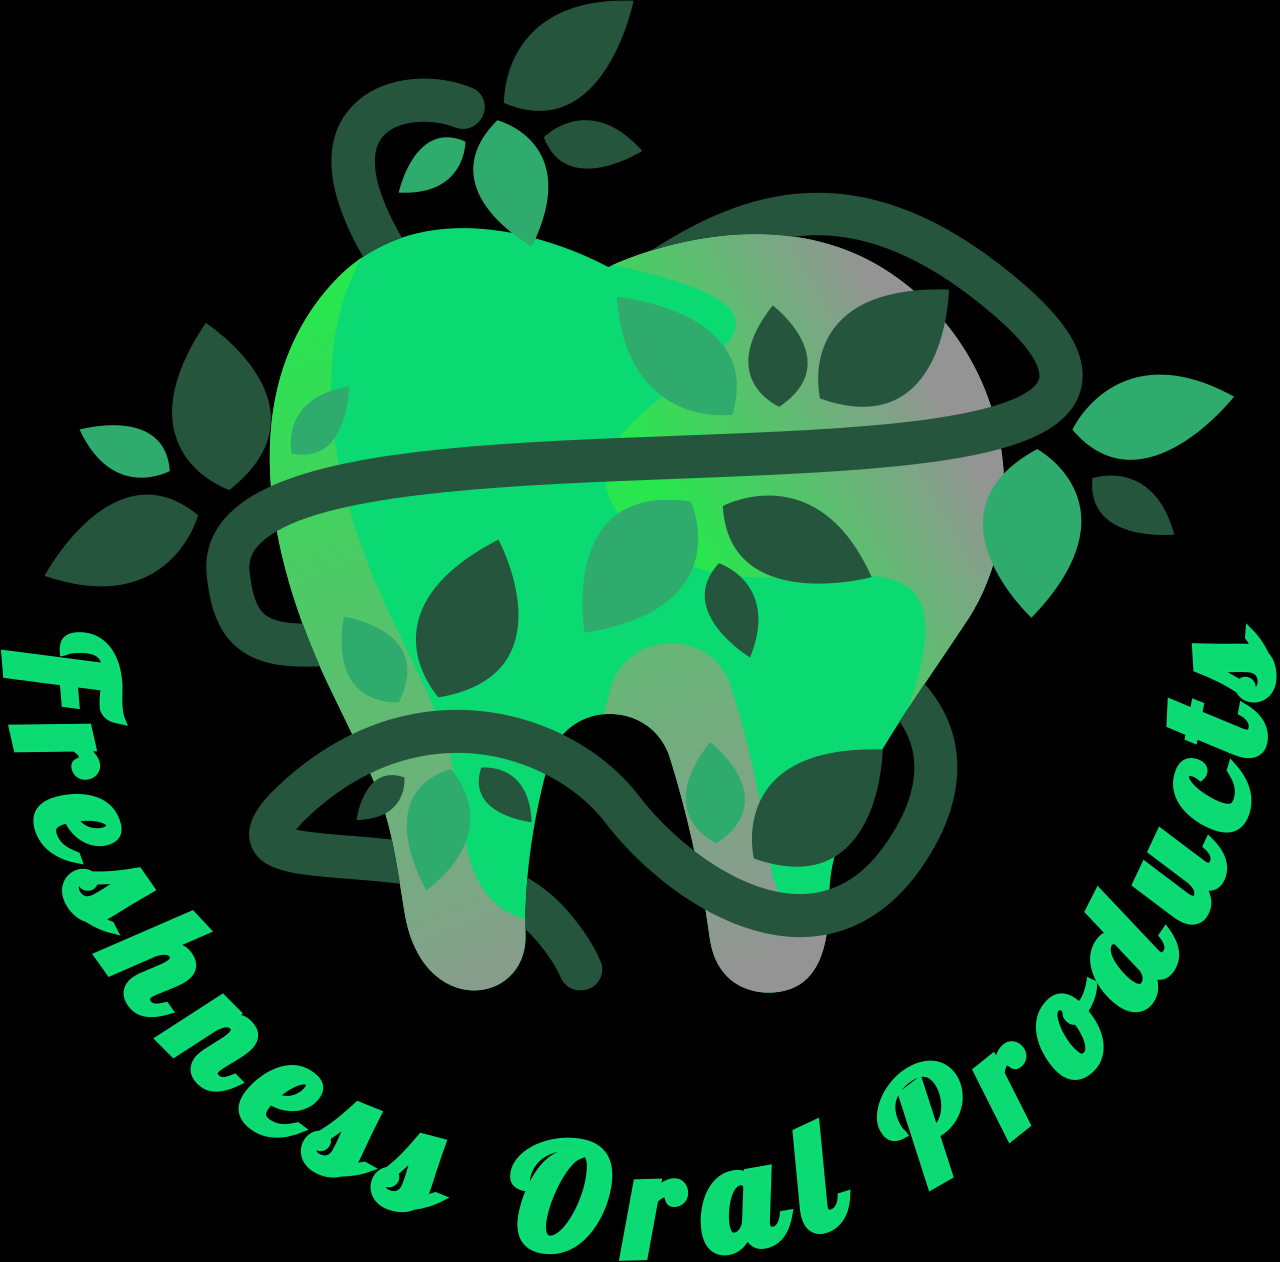 Freshness Oral Products's logo